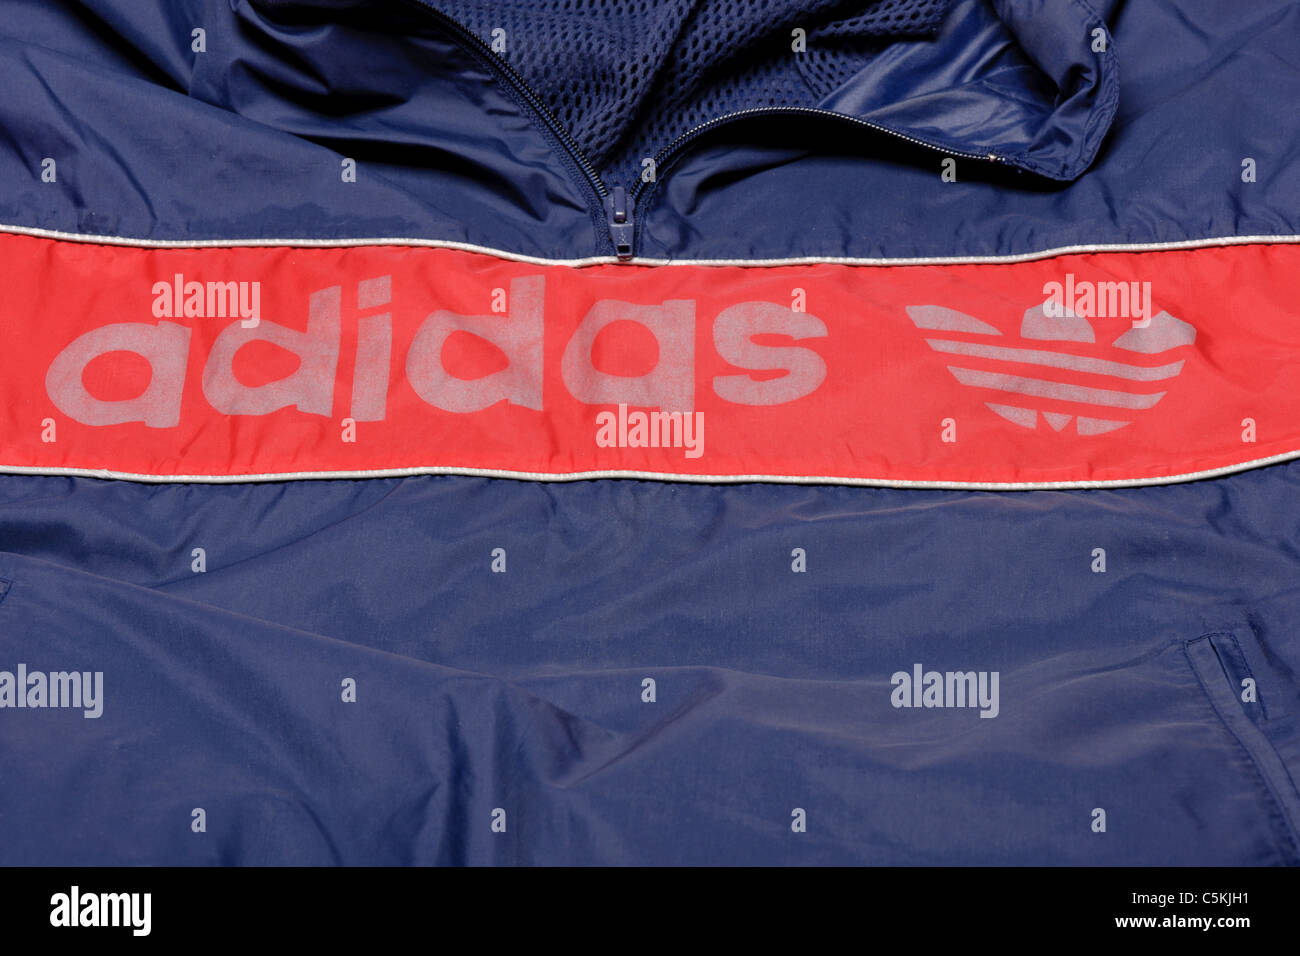 Adidas vintage rain jacket sportswear cagoule from the 1980's Stock Photo -  Alamy